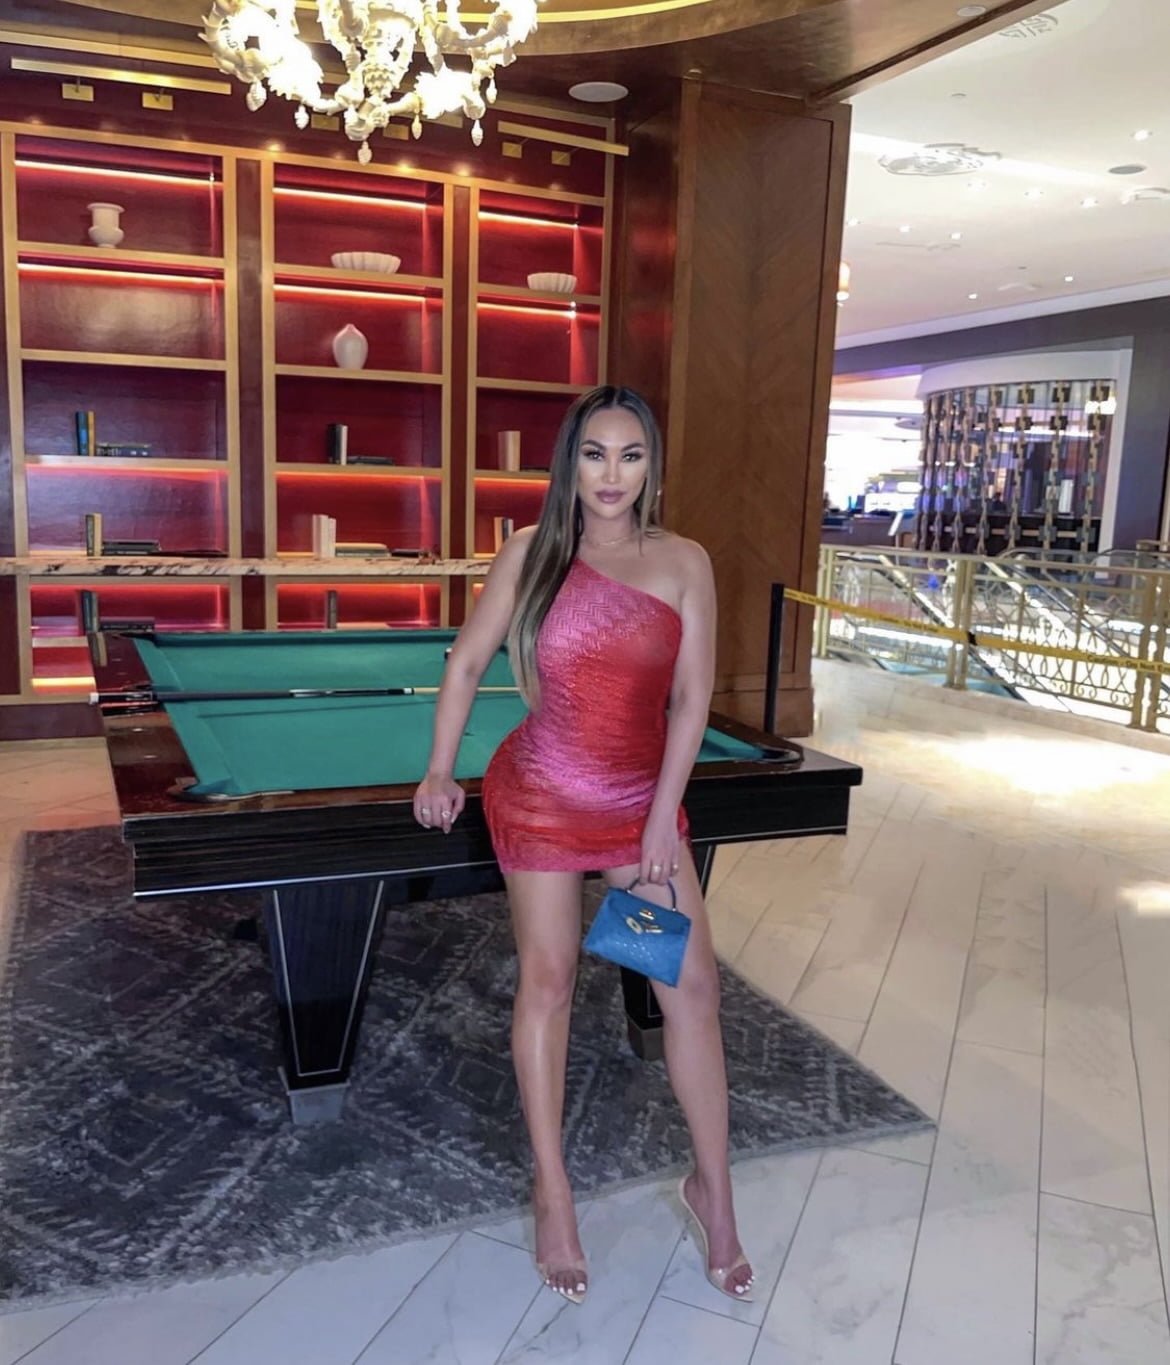 Bling Empire's Christine Alexandra Chiu dons a bedazzled silver